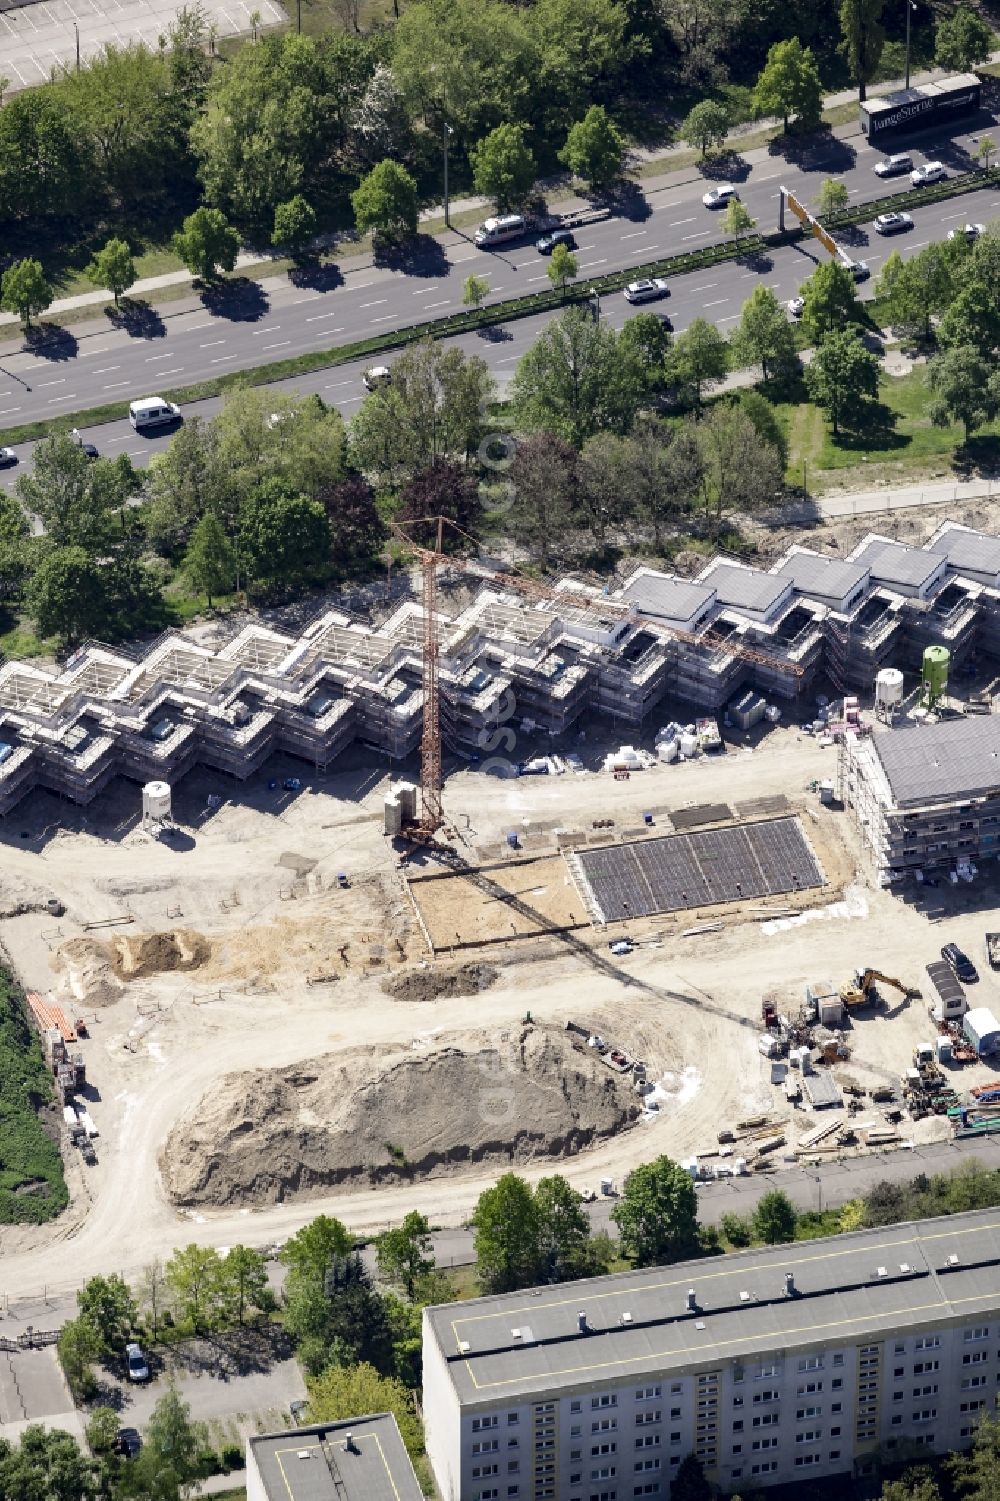 Aerial image Berlin - Construction site of a new residential area of Gensinger Viertel in the Friedrichsfelde part of Lichtenberg in Berlin in Germany. The site is located on Gensinger Strasse and is part of a gentrification and re-development project of the area. Hanseatische Immobilien Treuhand is building single family units, semi-detached houses and town houses